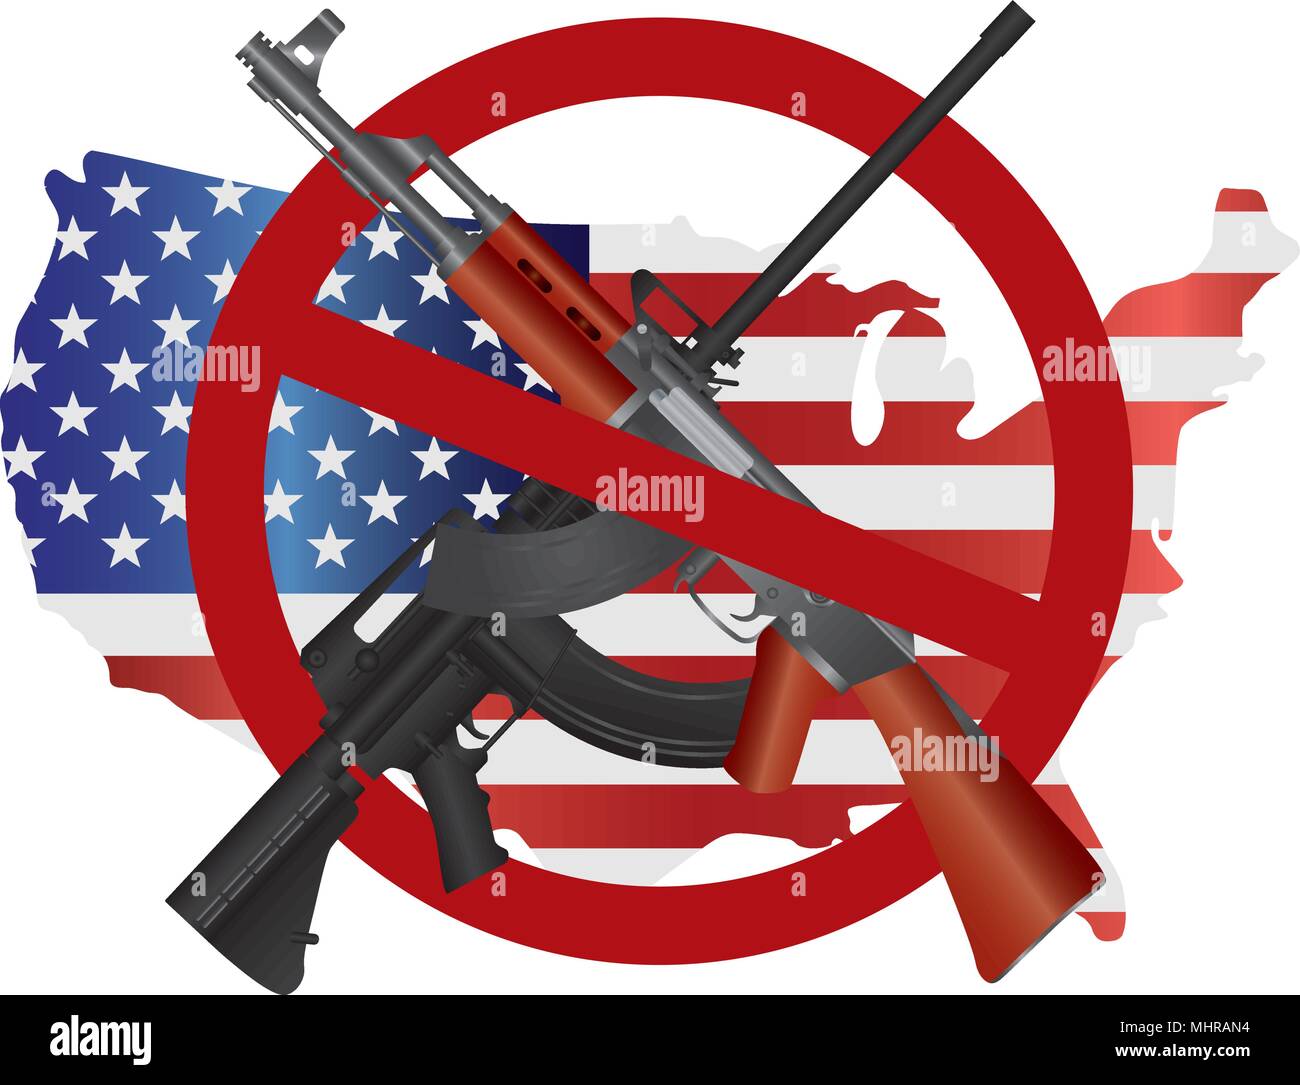 Assault Rifles AR 15 and AK 47 Semi Automatic Weapons ban symbol on USA Map Flag Second Amendments Consitution Illustration Stock Vector